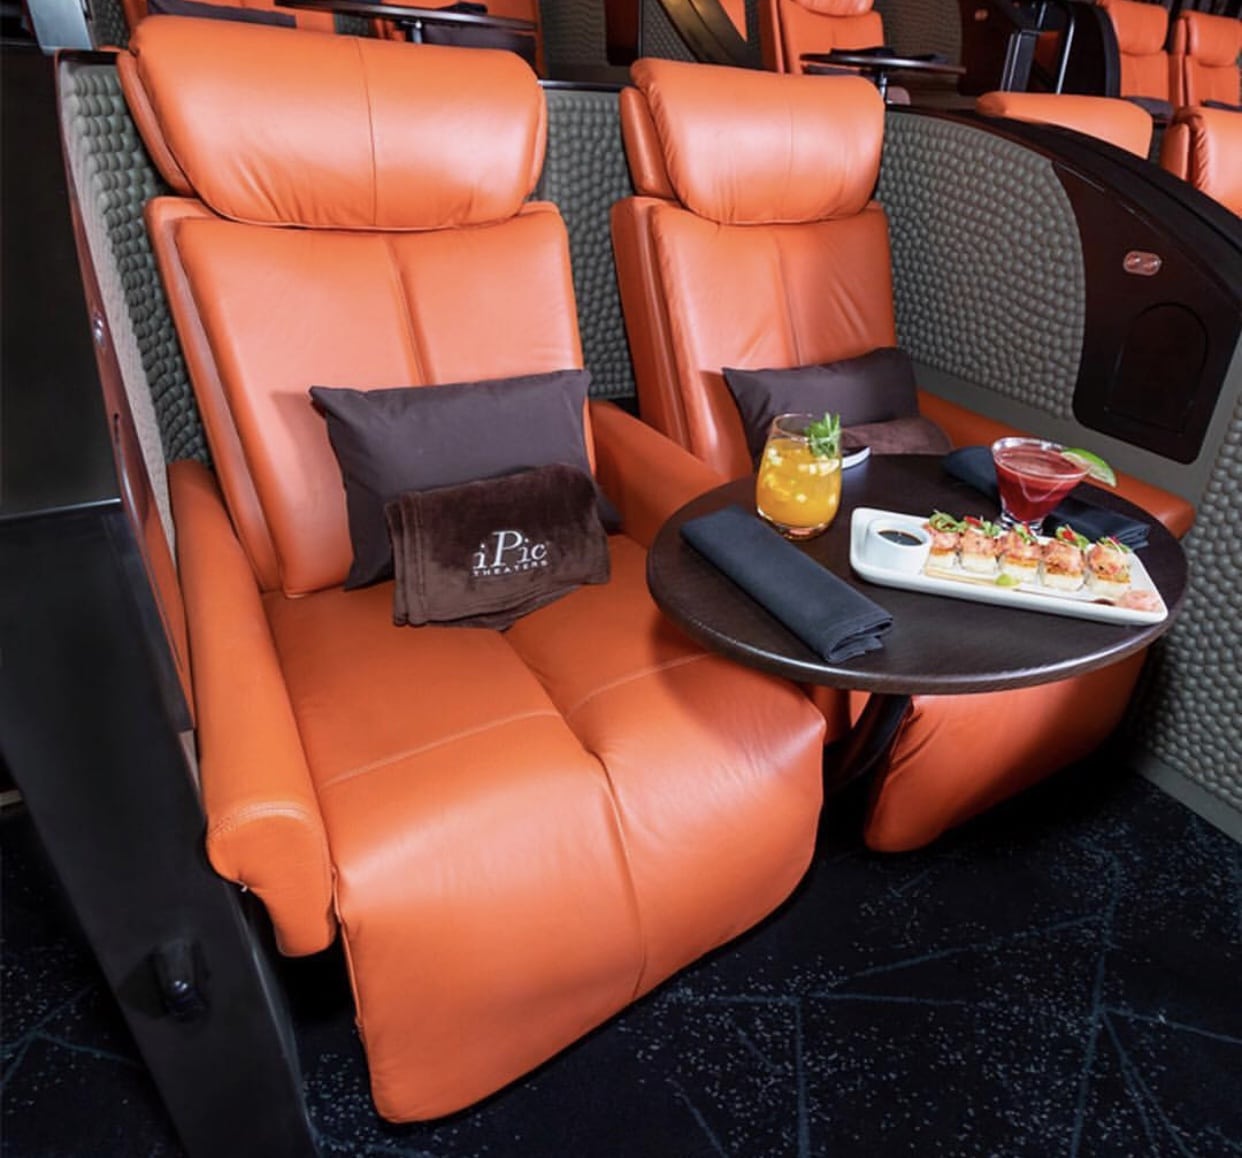 iPic Theaters: Fort Lee's Dine-In Movie Experience - Hoboken Girl